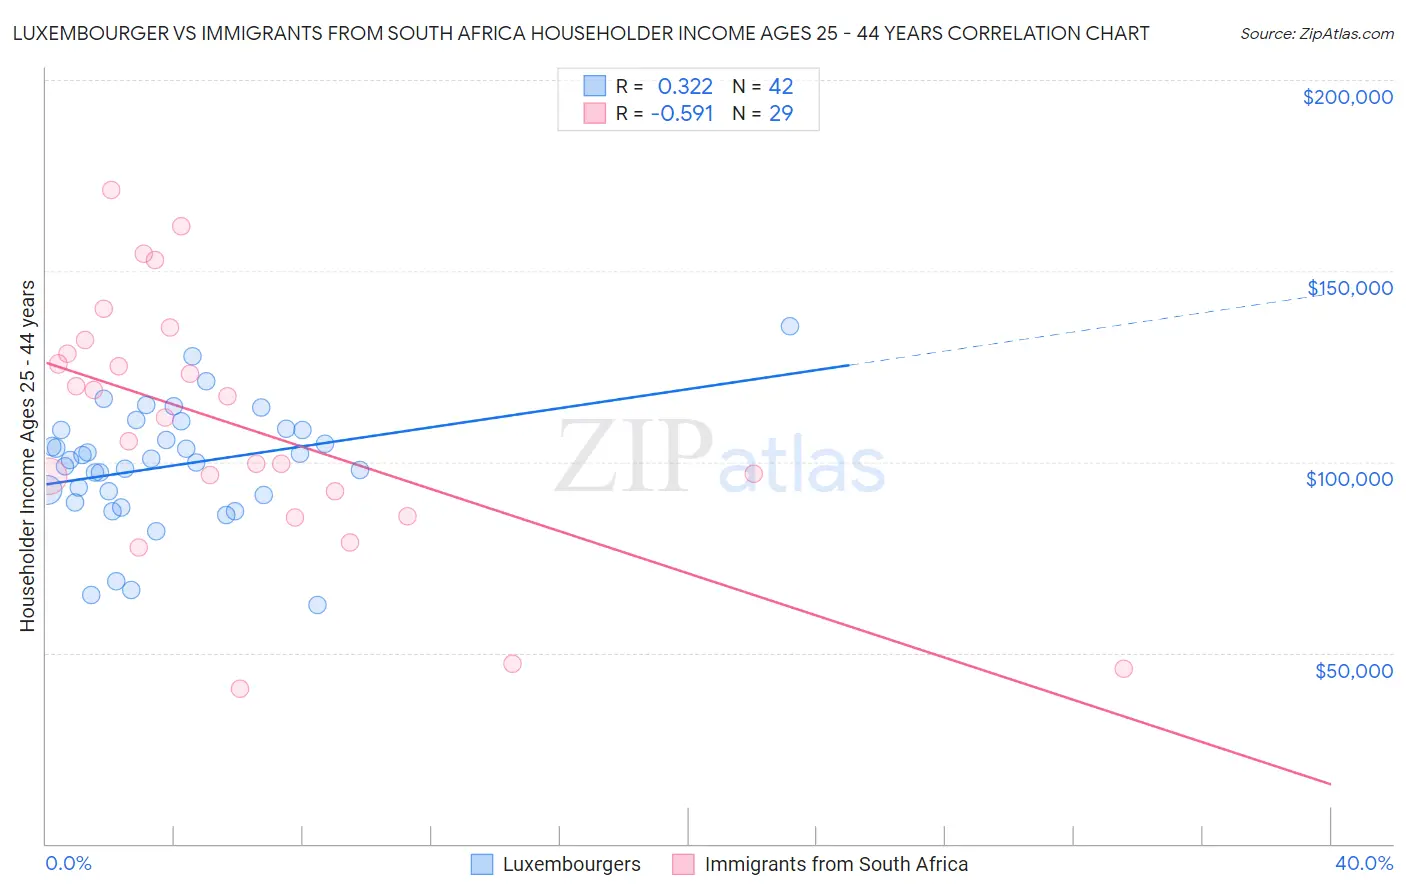 Luxembourger vs Immigrants from South Africa Householder Income Ages 25 - 44 years